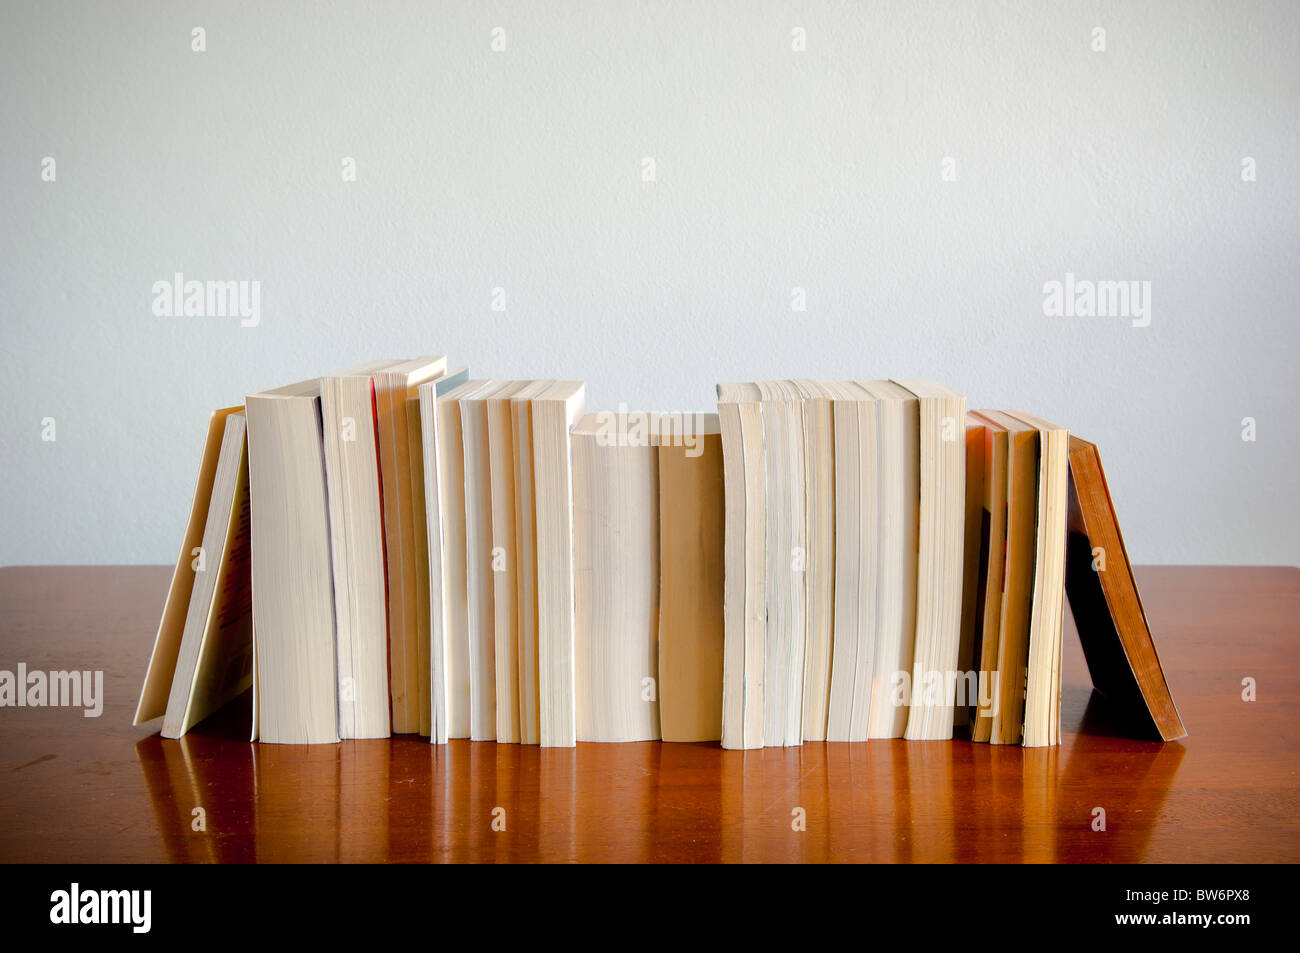 A row of books sits on a timber table with blank space behind Stock Photo